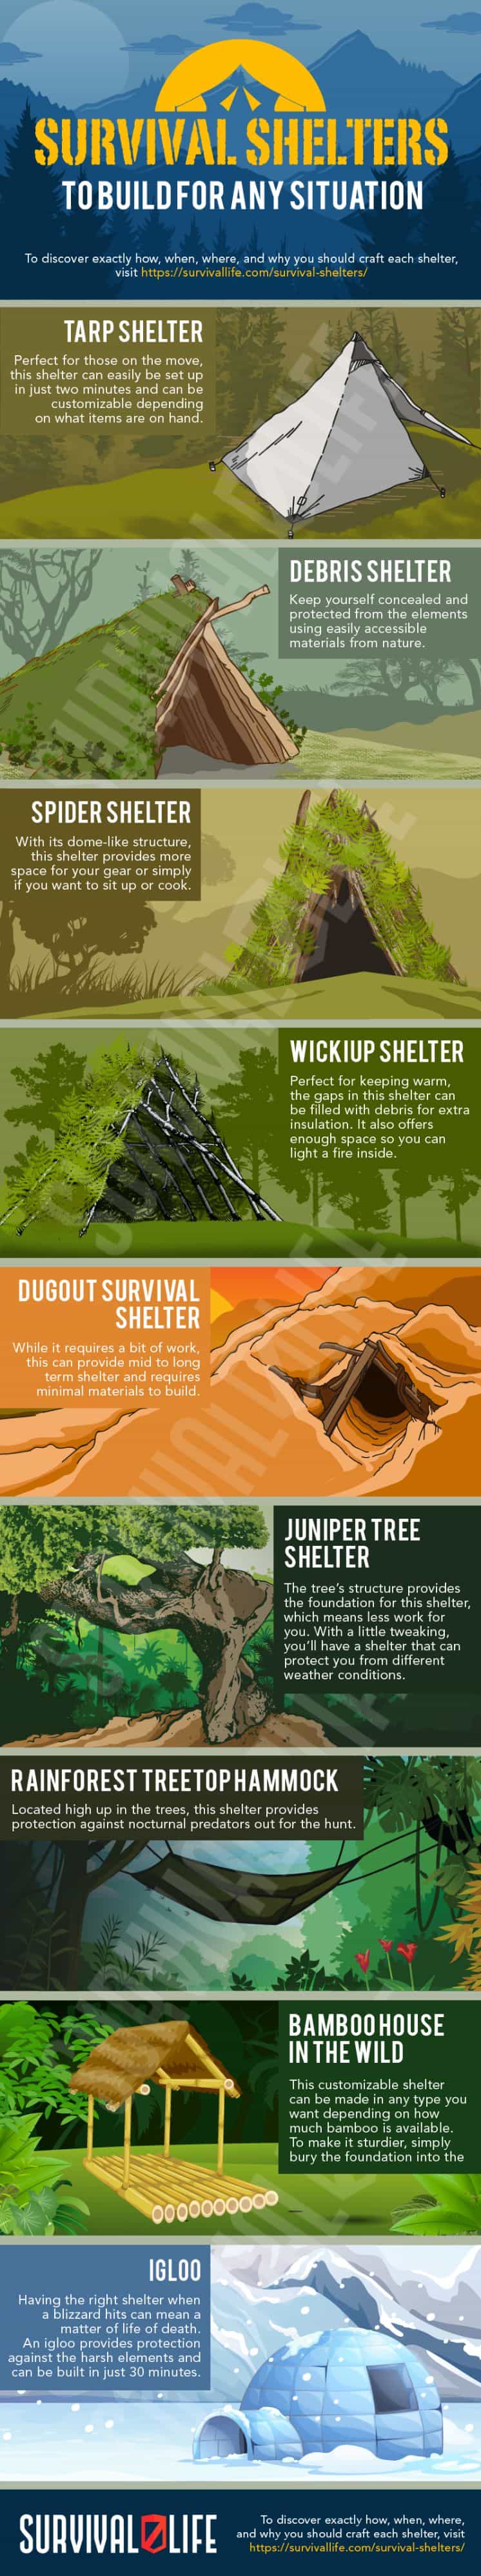  survival-life-survival-shelters-to-build-for-any-situation